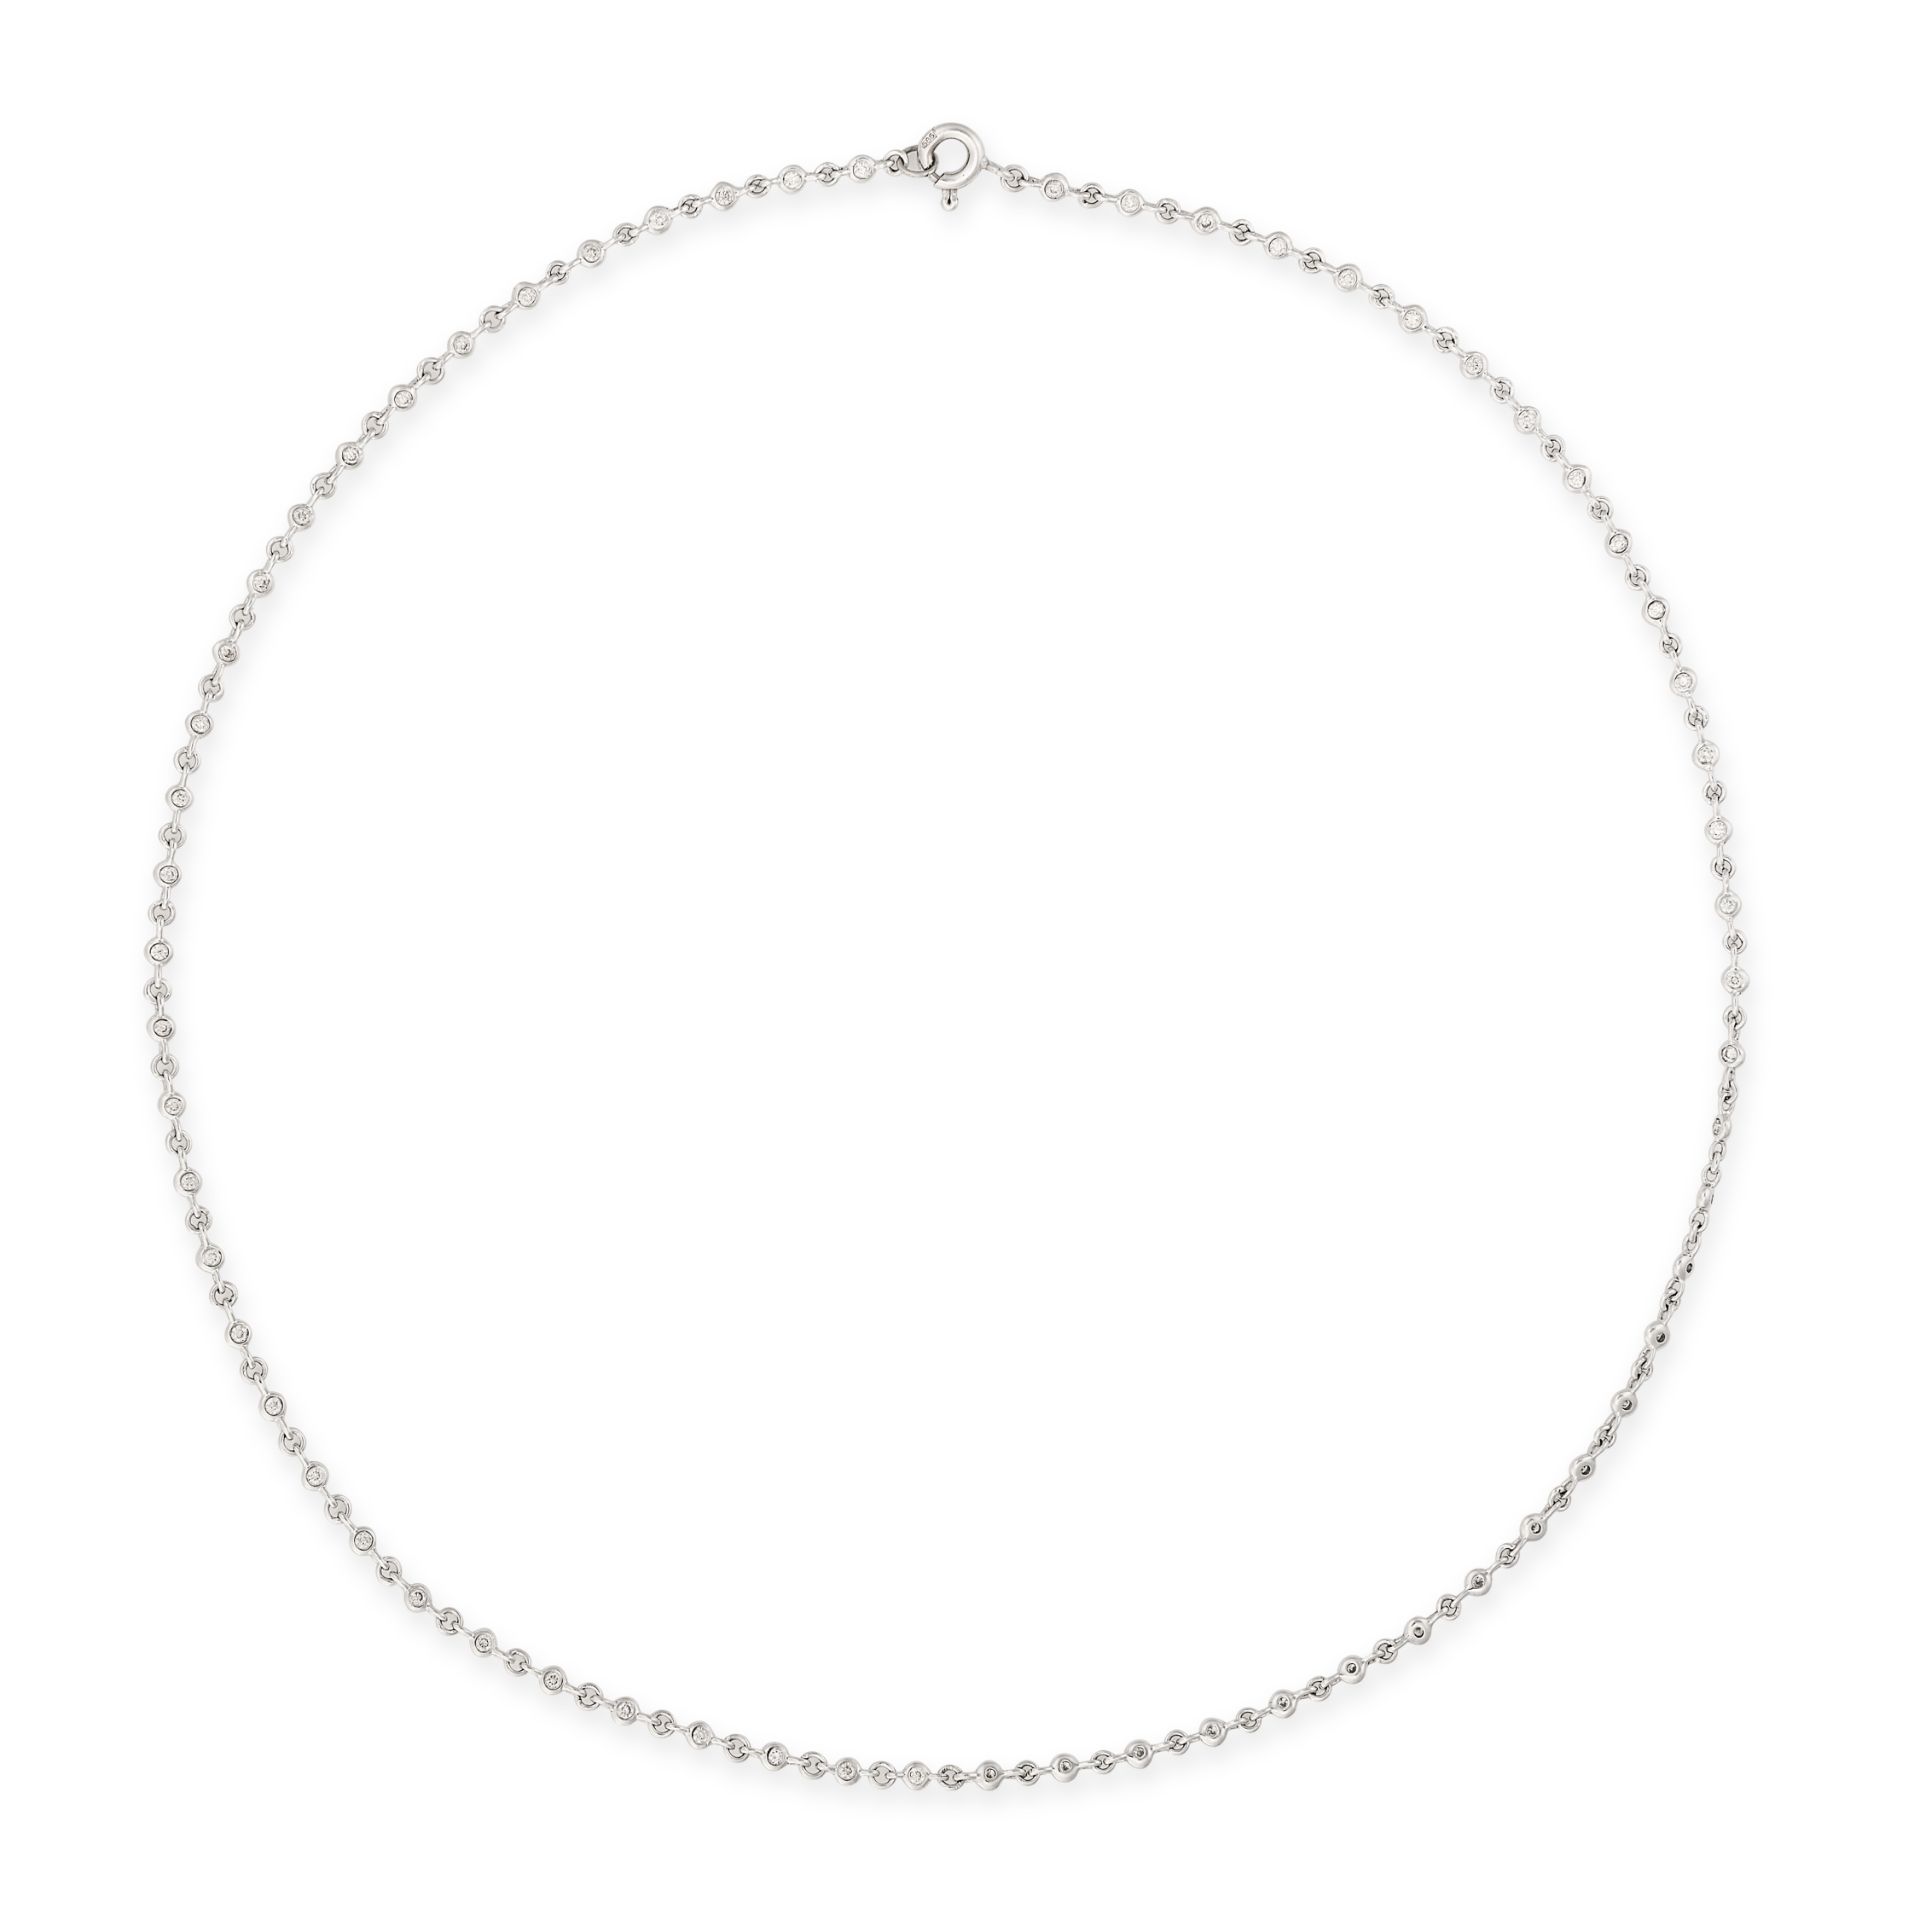 A DIAMOND CHAIN NECKLACE in 14ct white gold, comprising a row of bezel set round brilliant cut